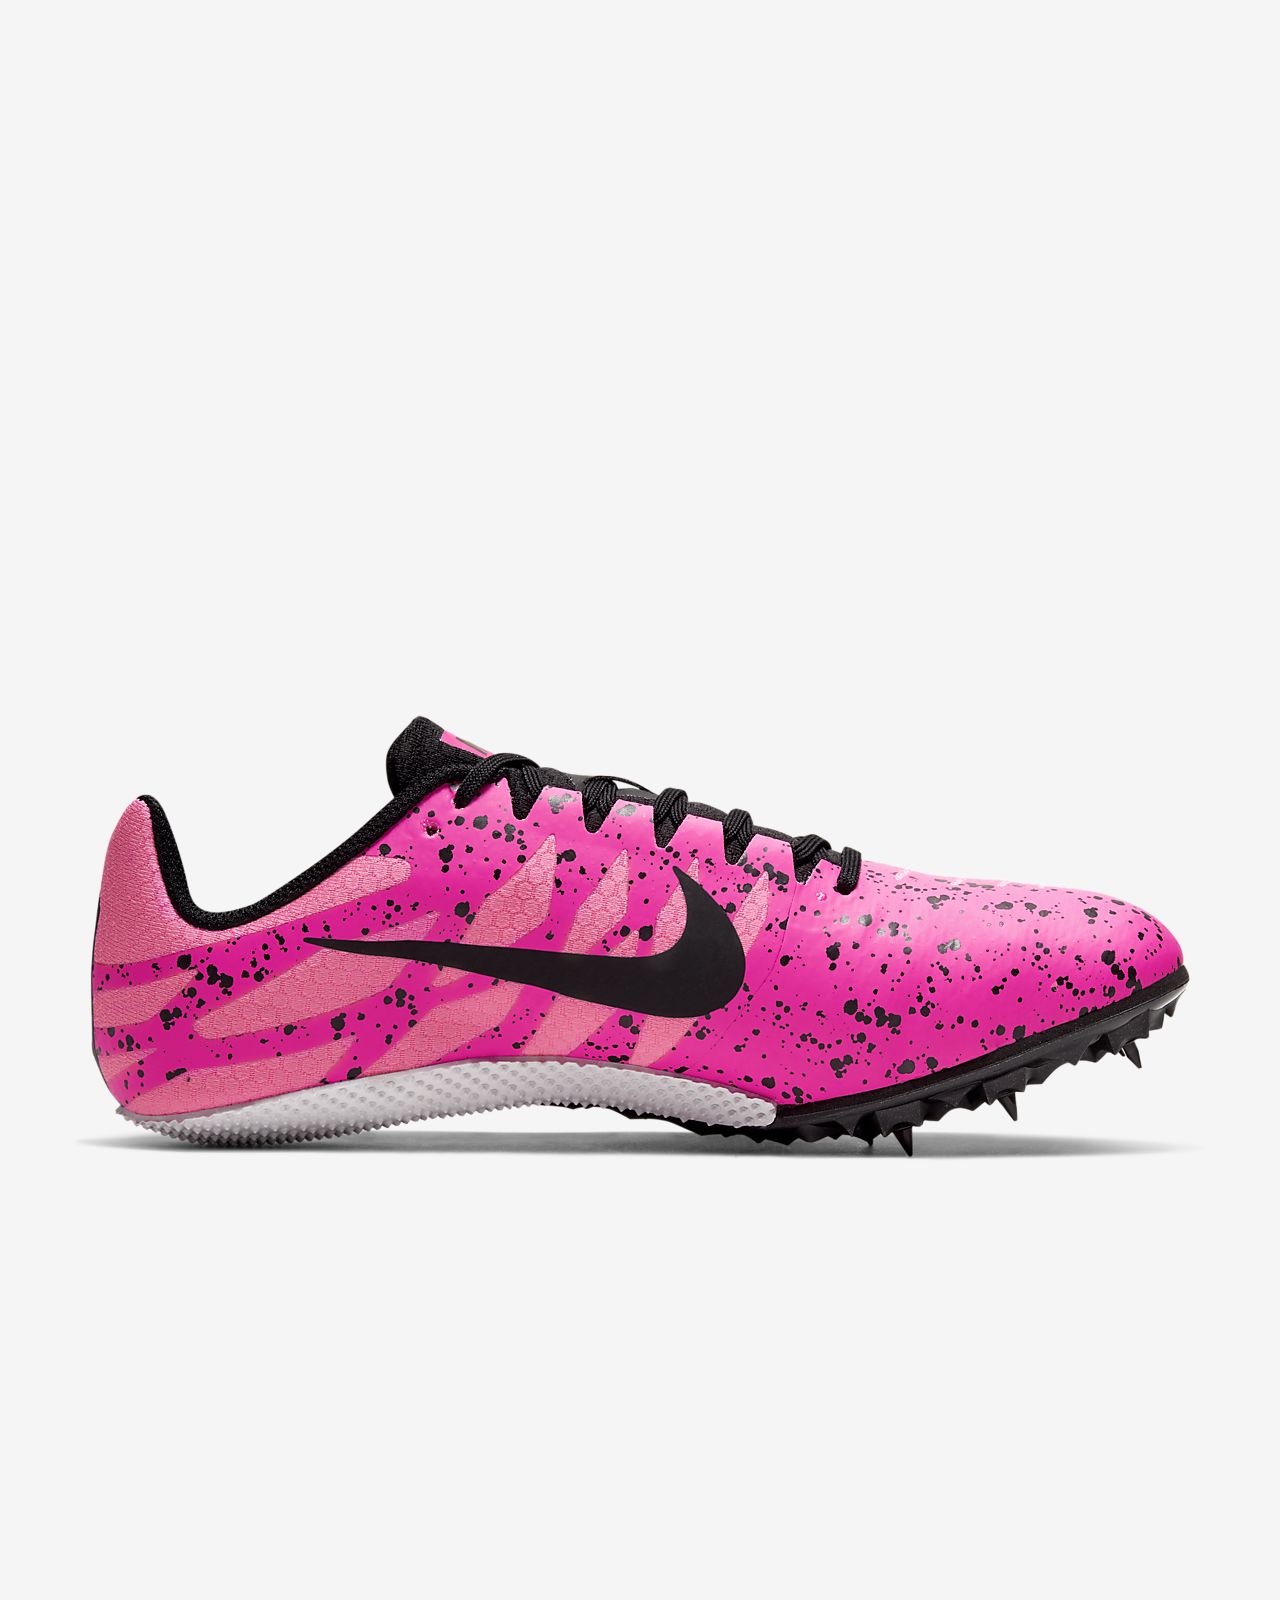 pink nike track spikes